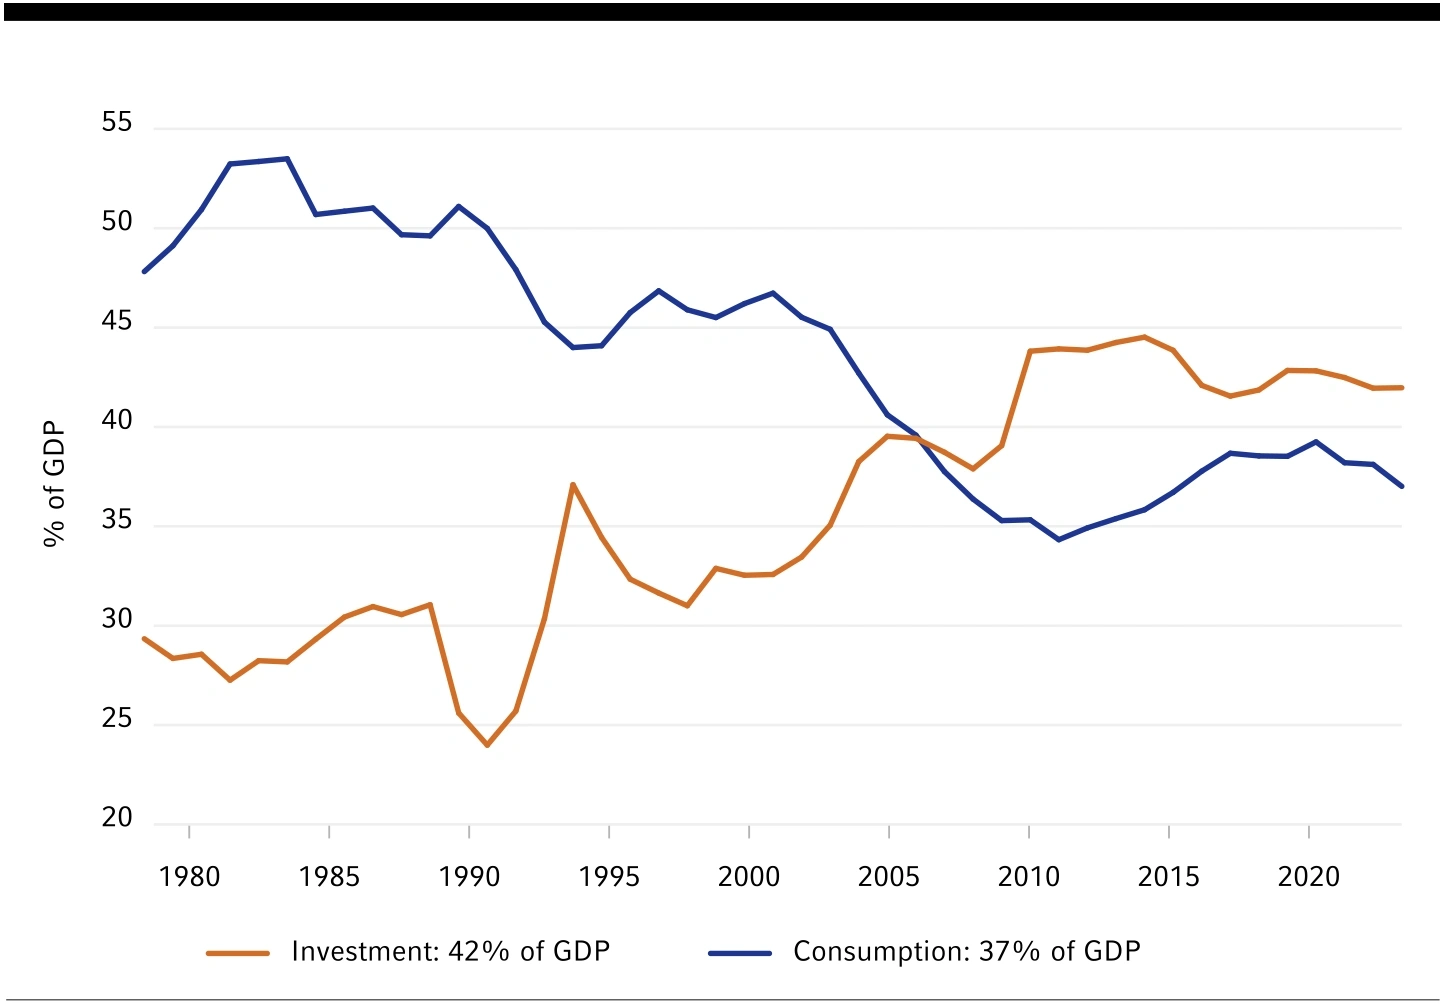 China: Investment and Consumption